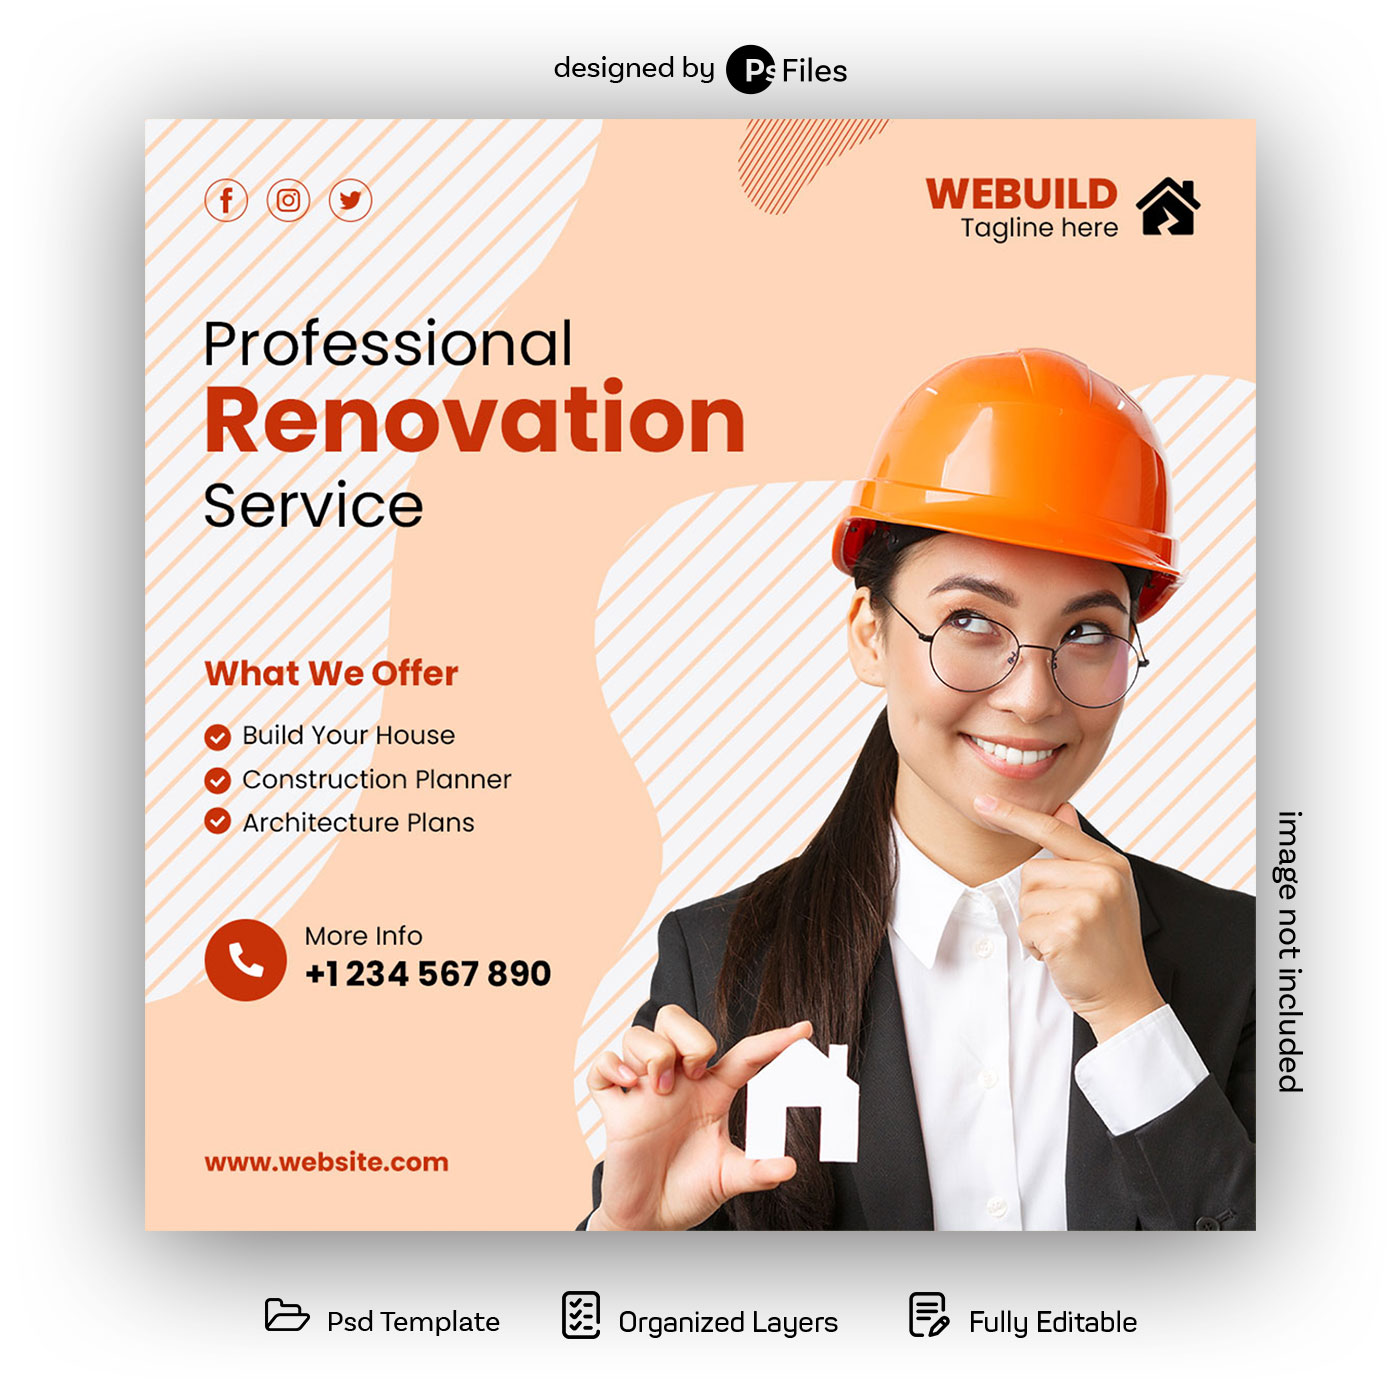 Free Instagram Post Template for Professional Renovation Service